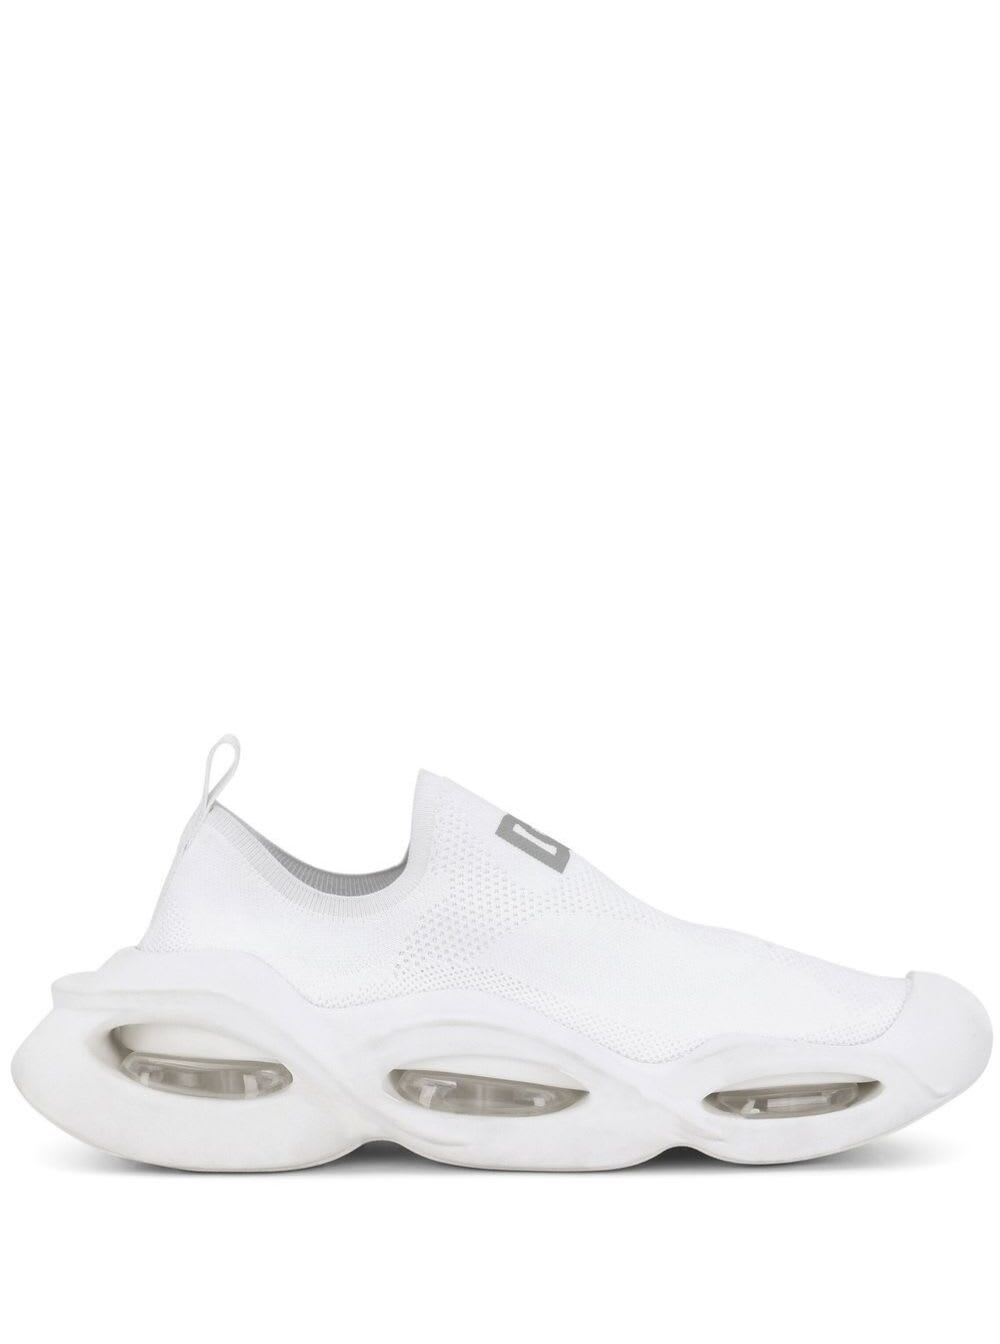 DOLCE & GABBANA WAVE WHITE SLIP-ON SNEAKERS IN POLYESTER MAN